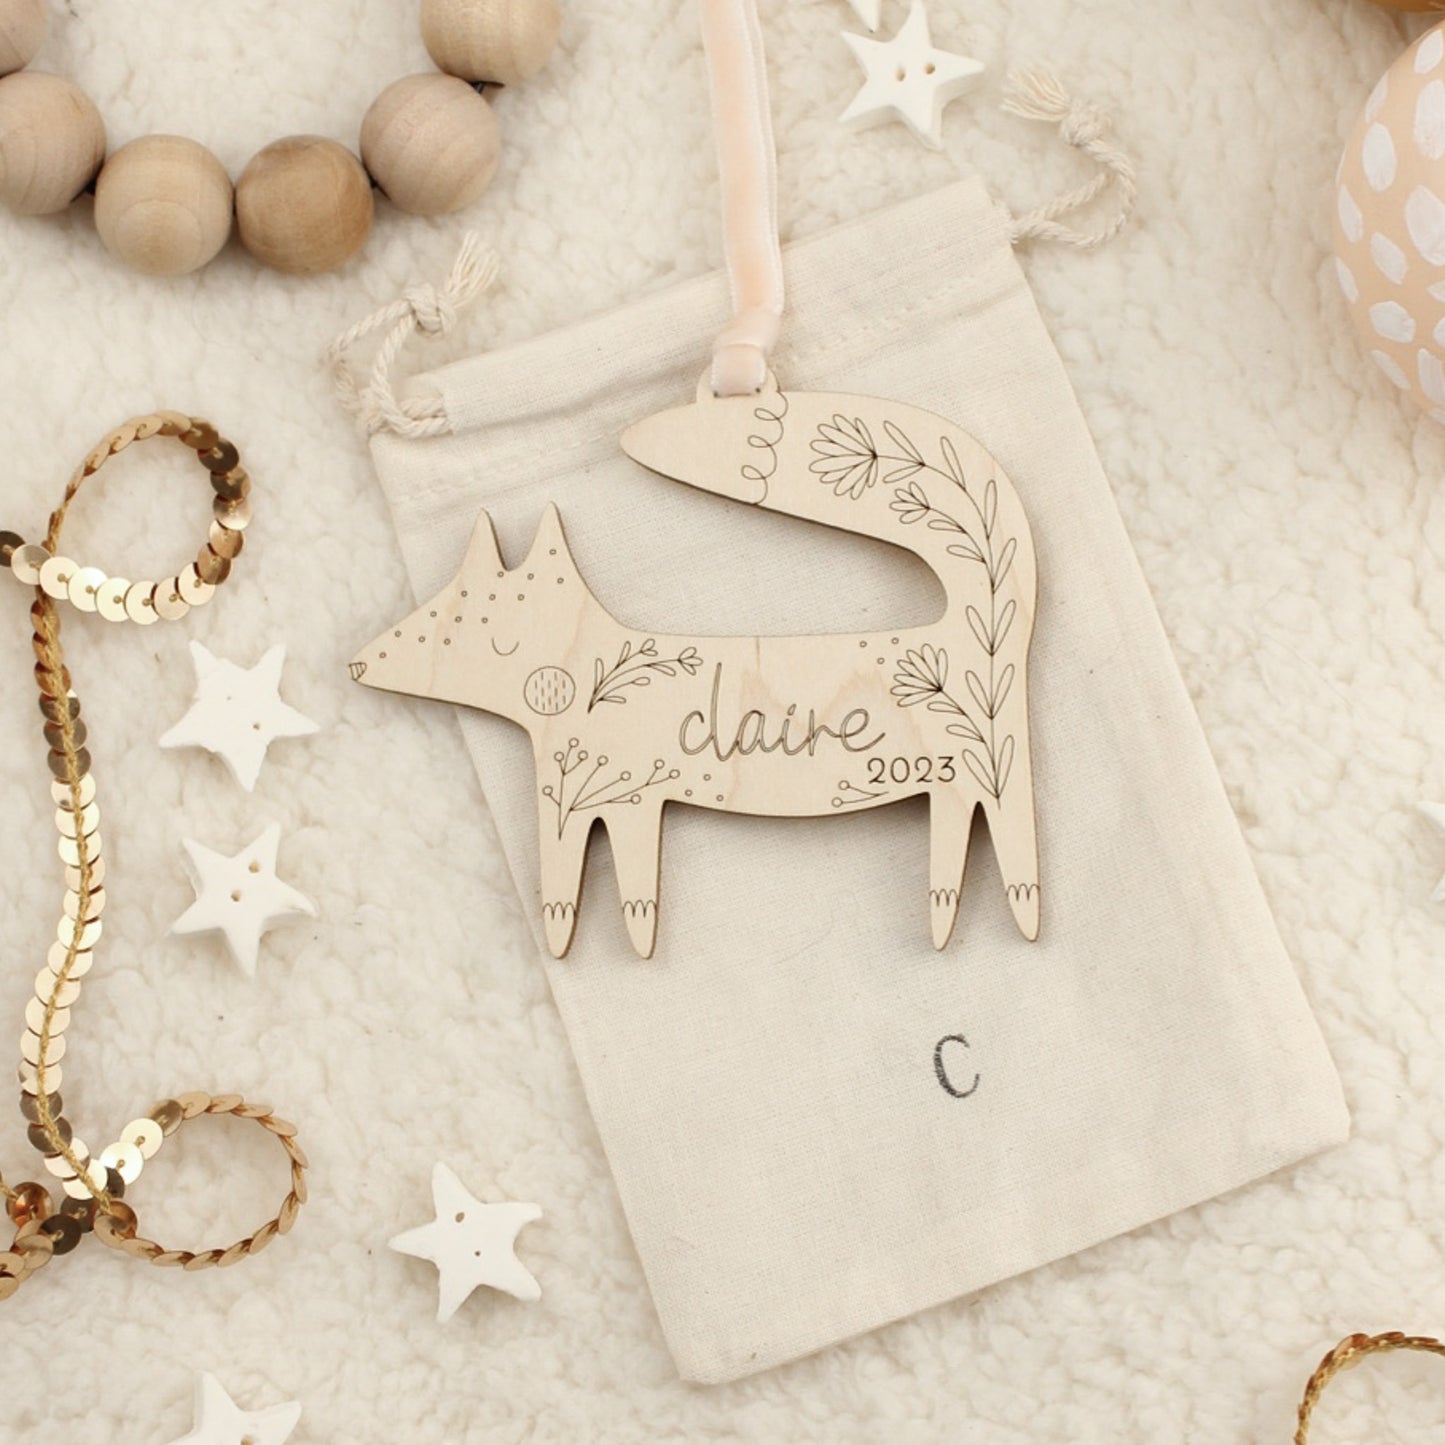 fox personalized wooden folksy christmas ornaments